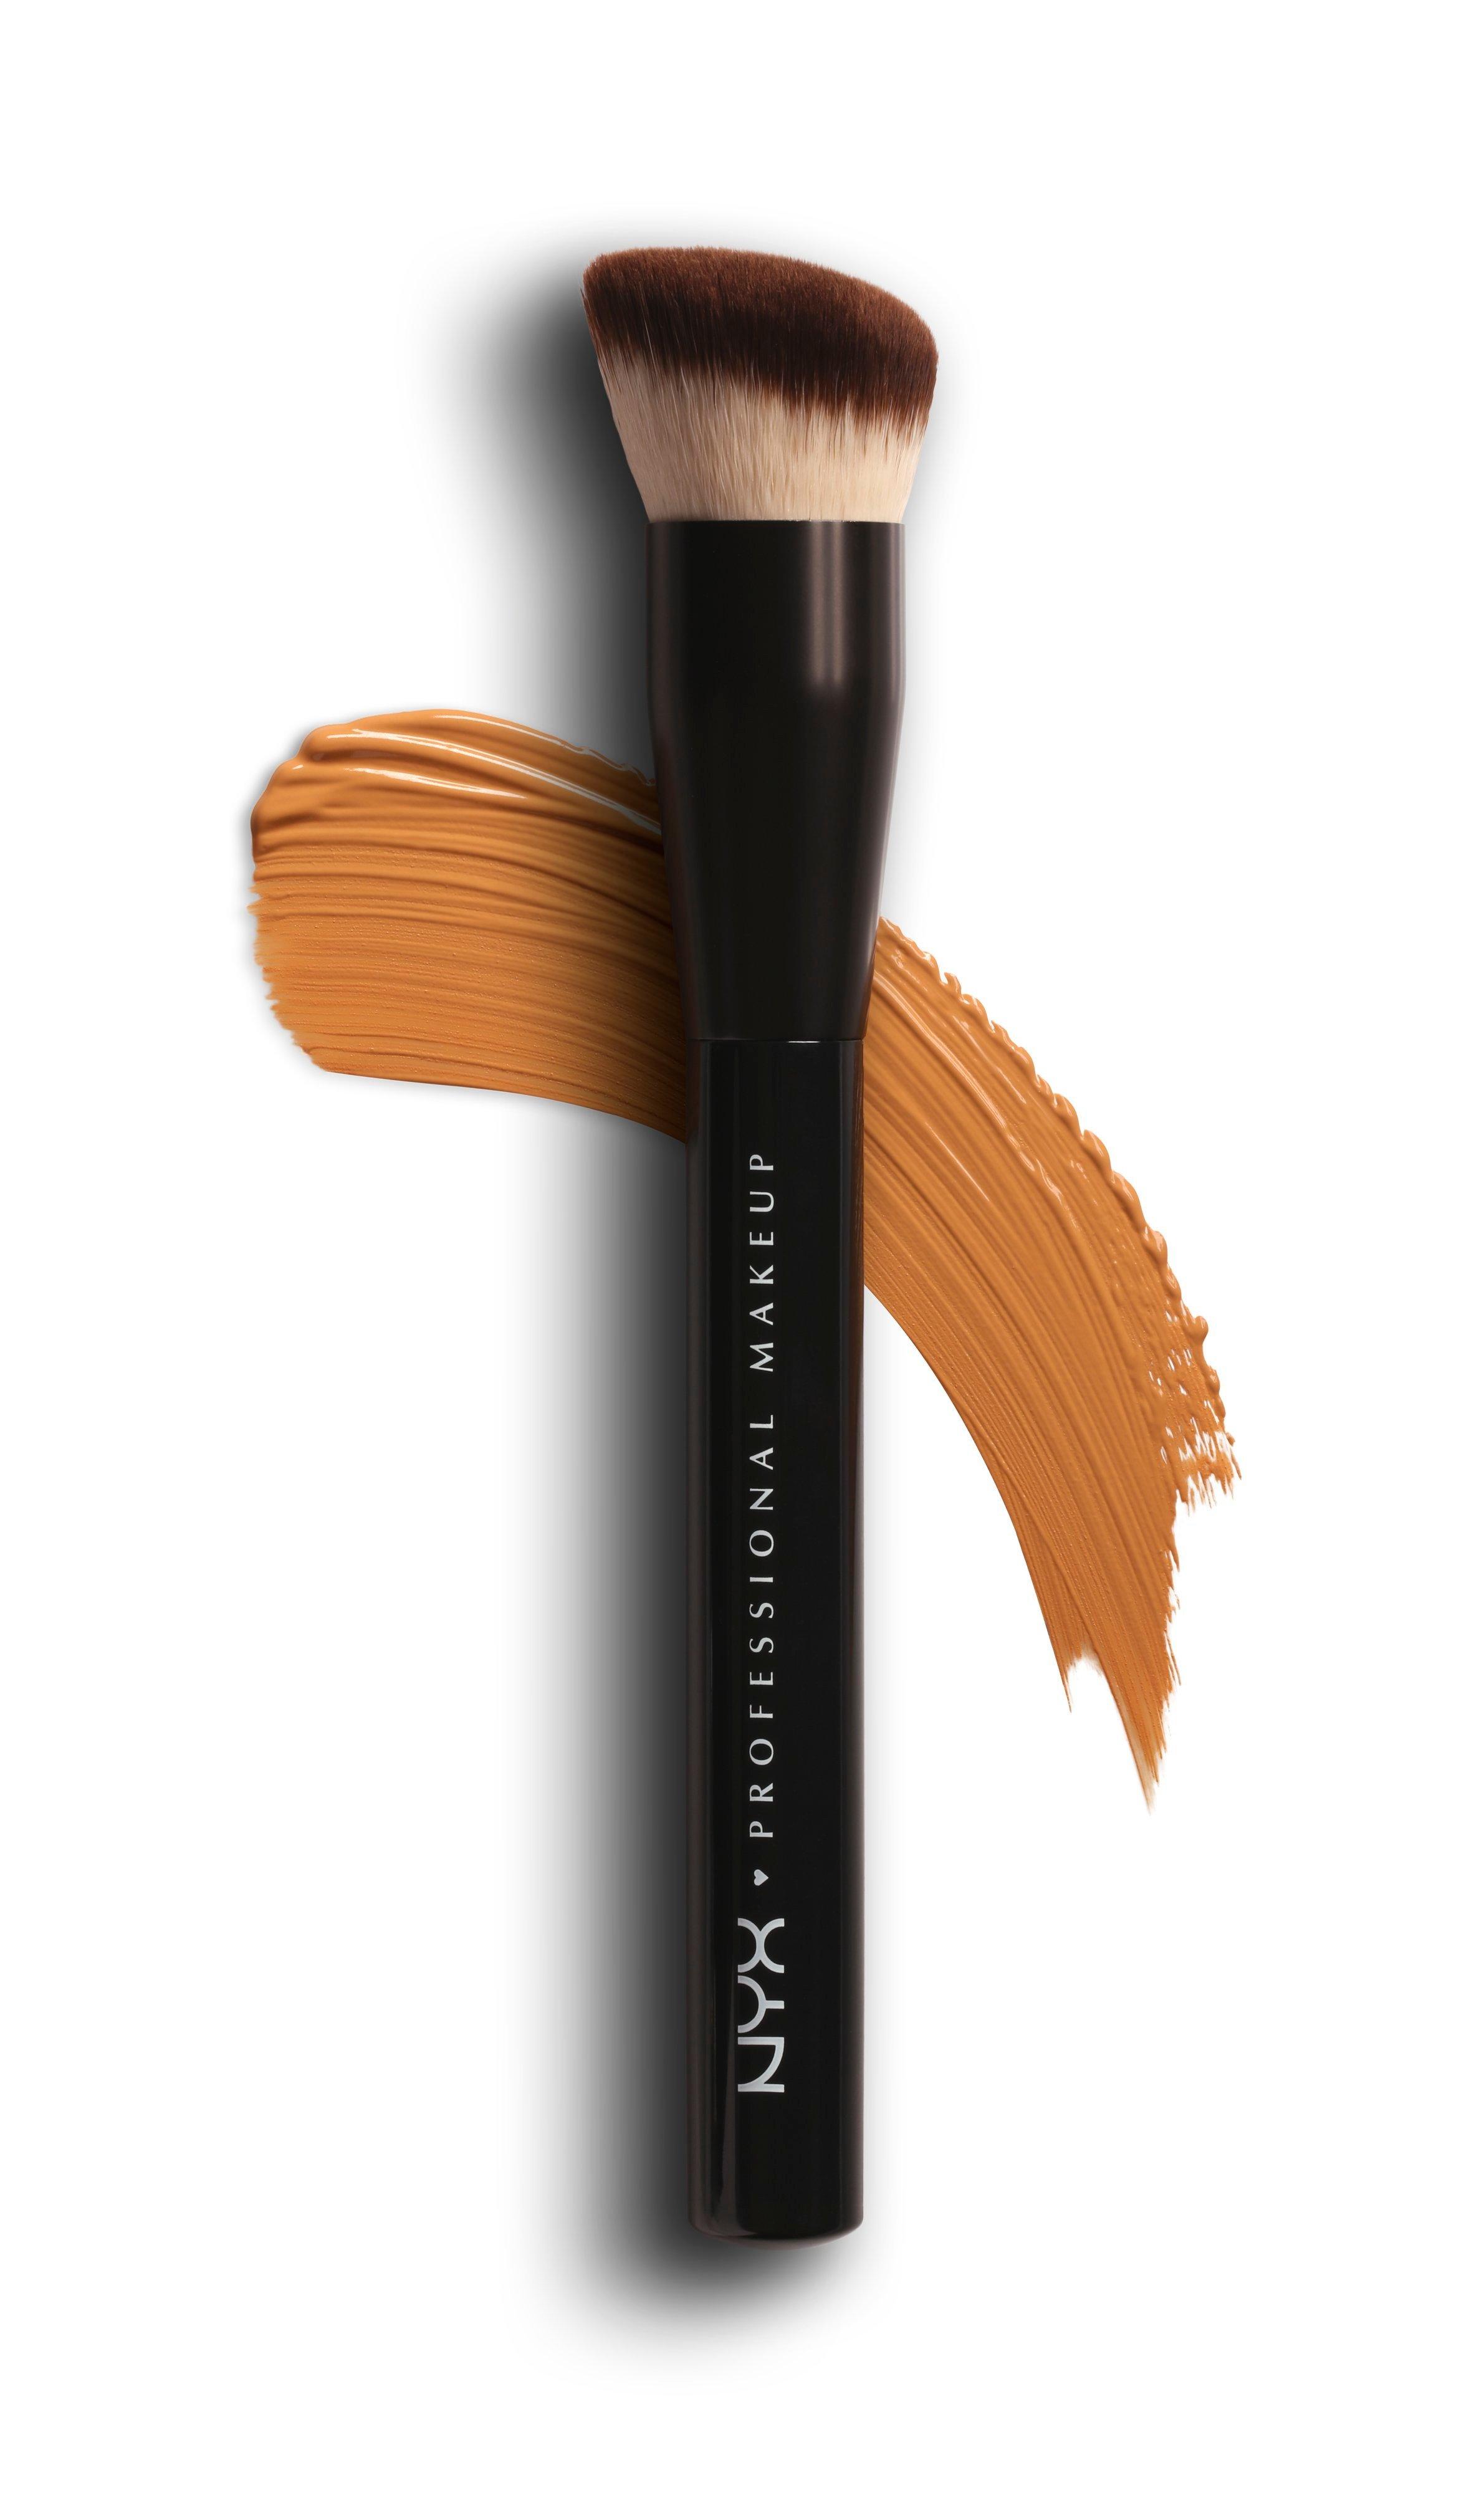 NYX-PROFESSIONAL-MAKEUP  Foundation Brush - Can't Stop Won't Stop 